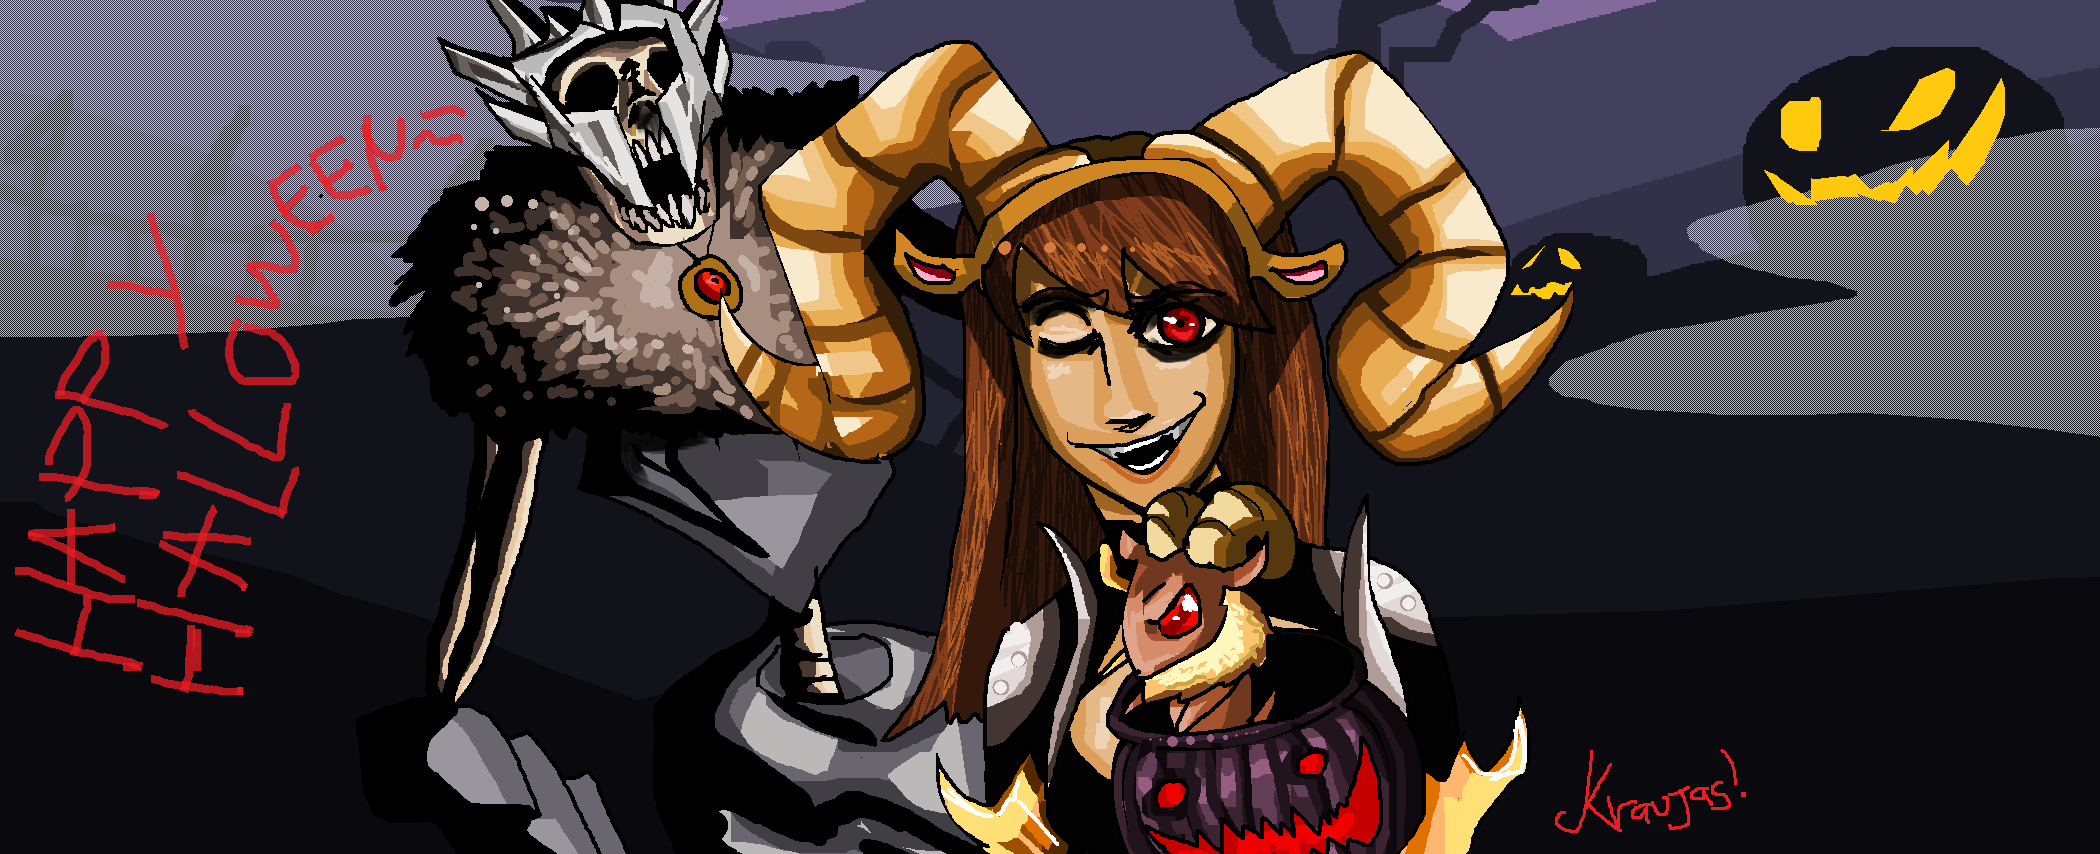 halloween__by_gramotoons-d6q4l1y.png